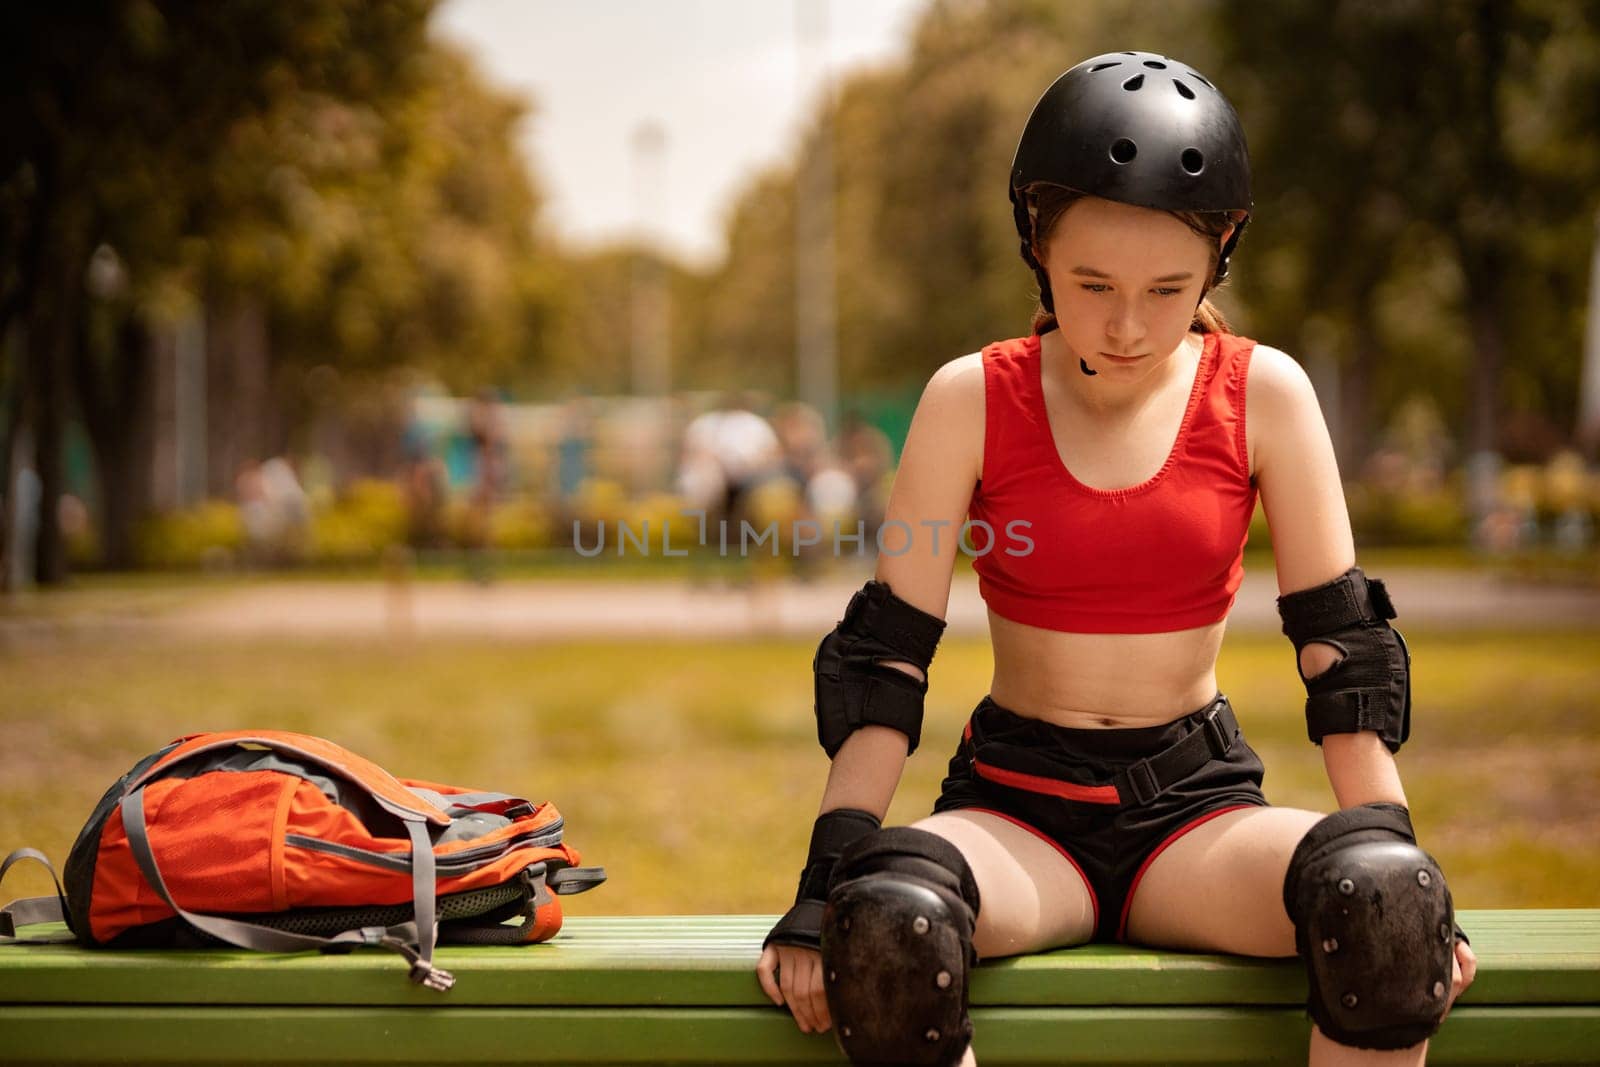 Roller skating girl in park rollerblading on inline skates. Caucasian young woman in outdoor activities. by MikeOrlov